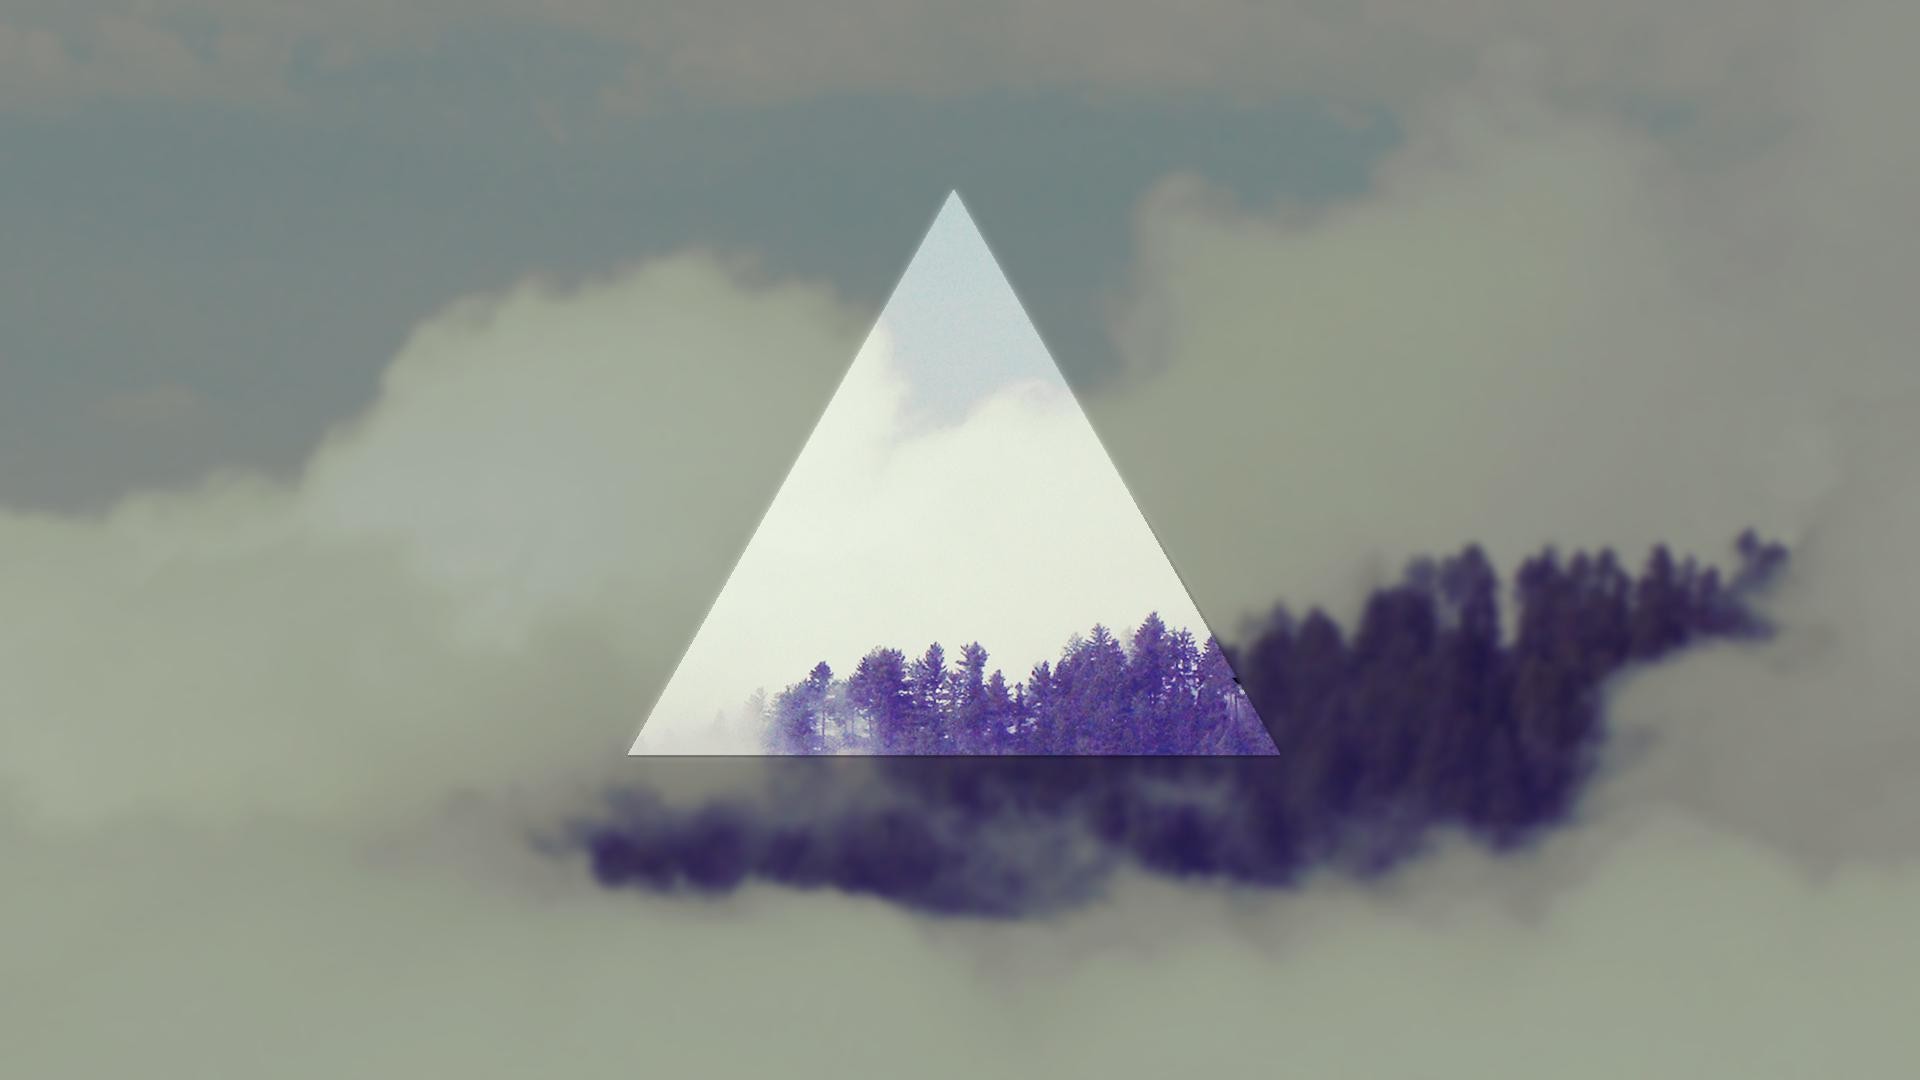 General 1920x1080 landscape geometry low poly shapes triangle digital art trees